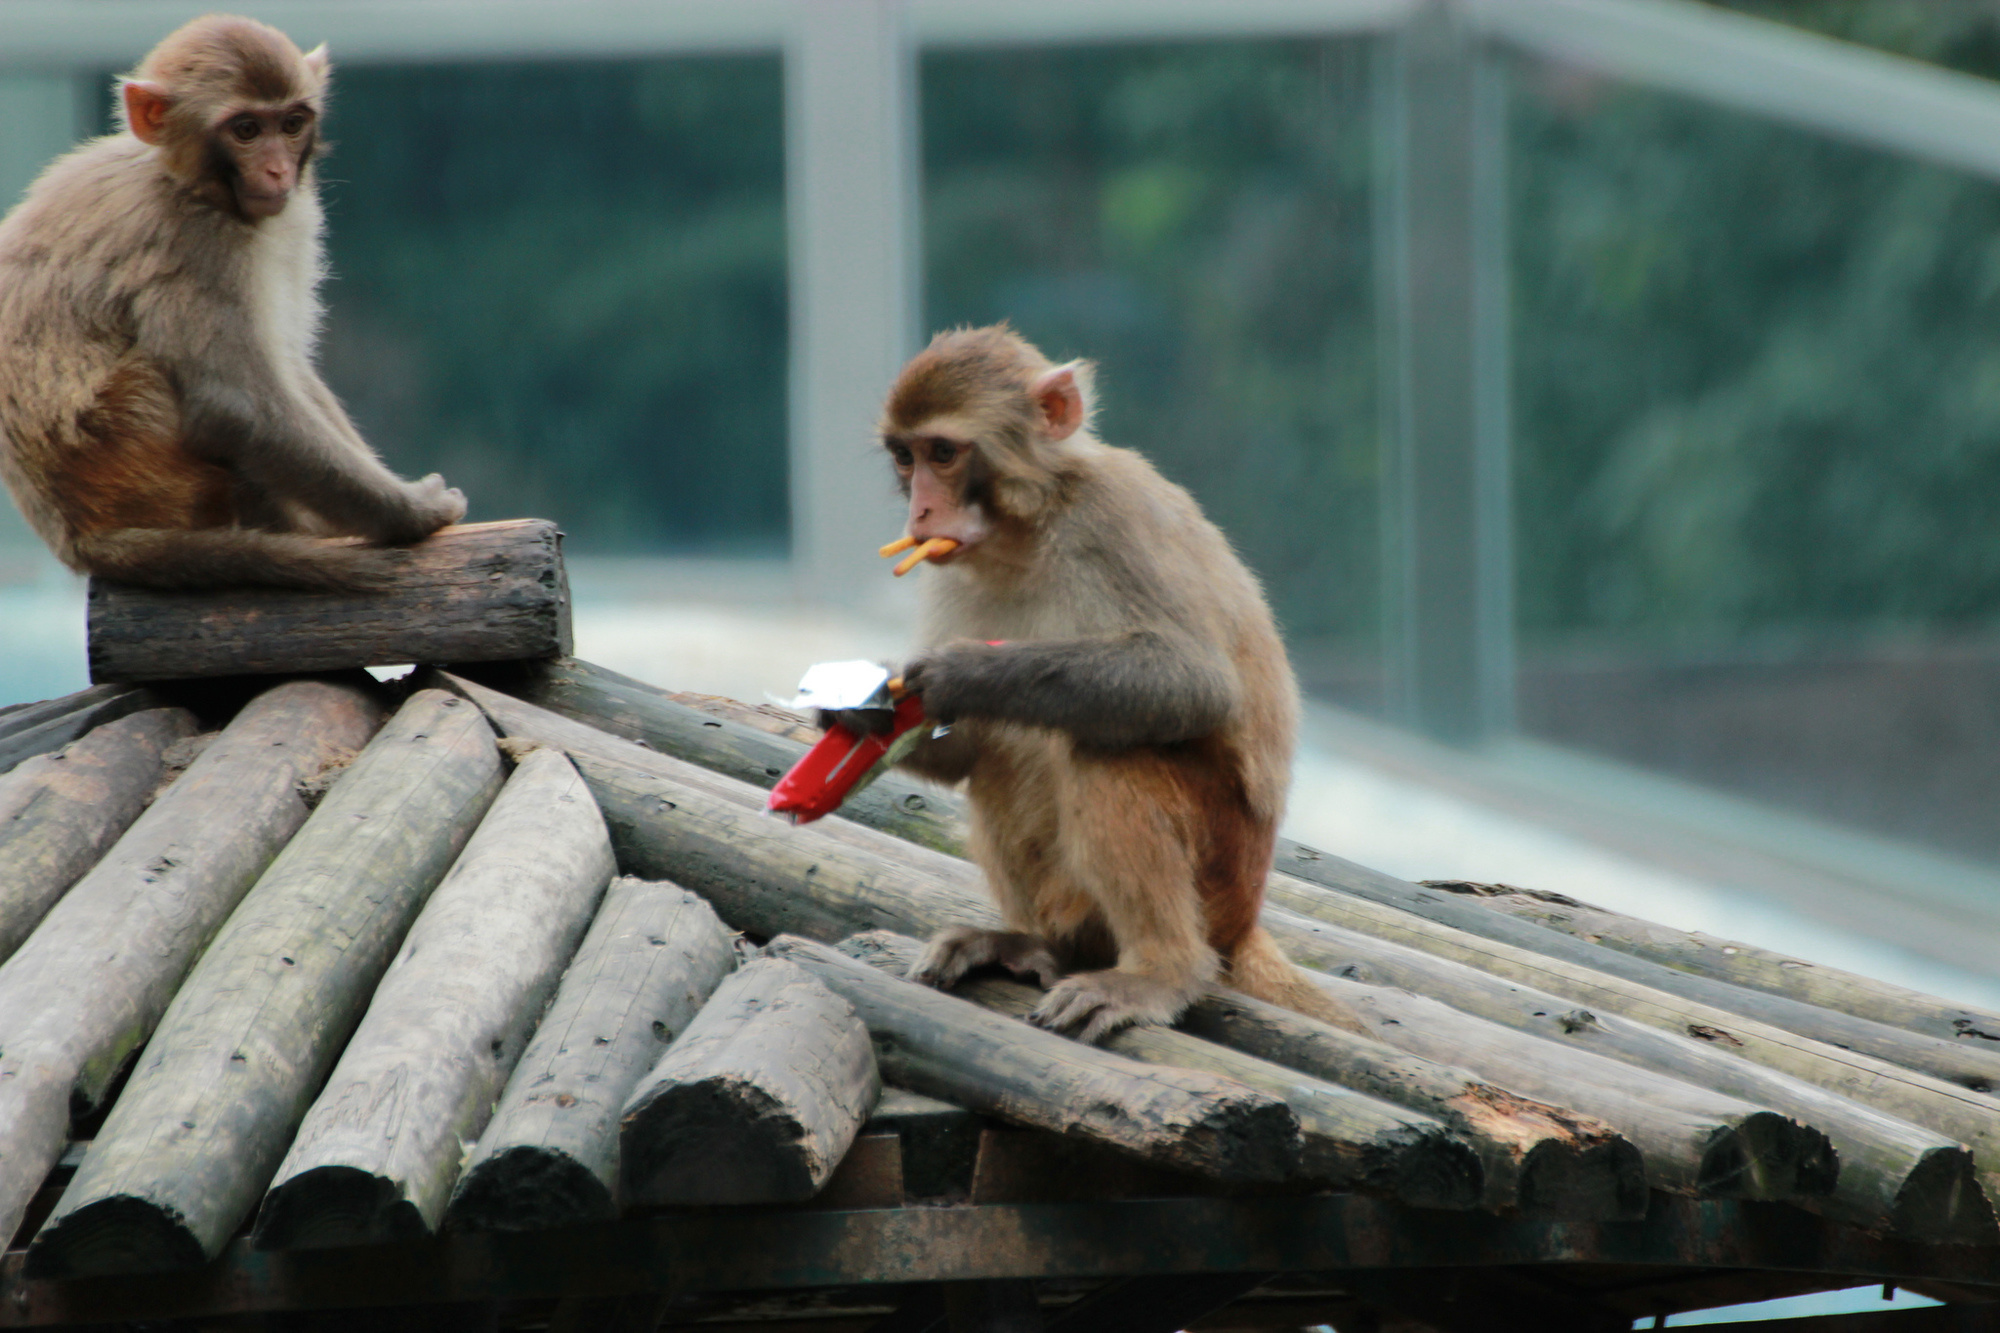 Fifteen monkeys escaped a primate research center in Japan by using trees as catapults over the electric fence.